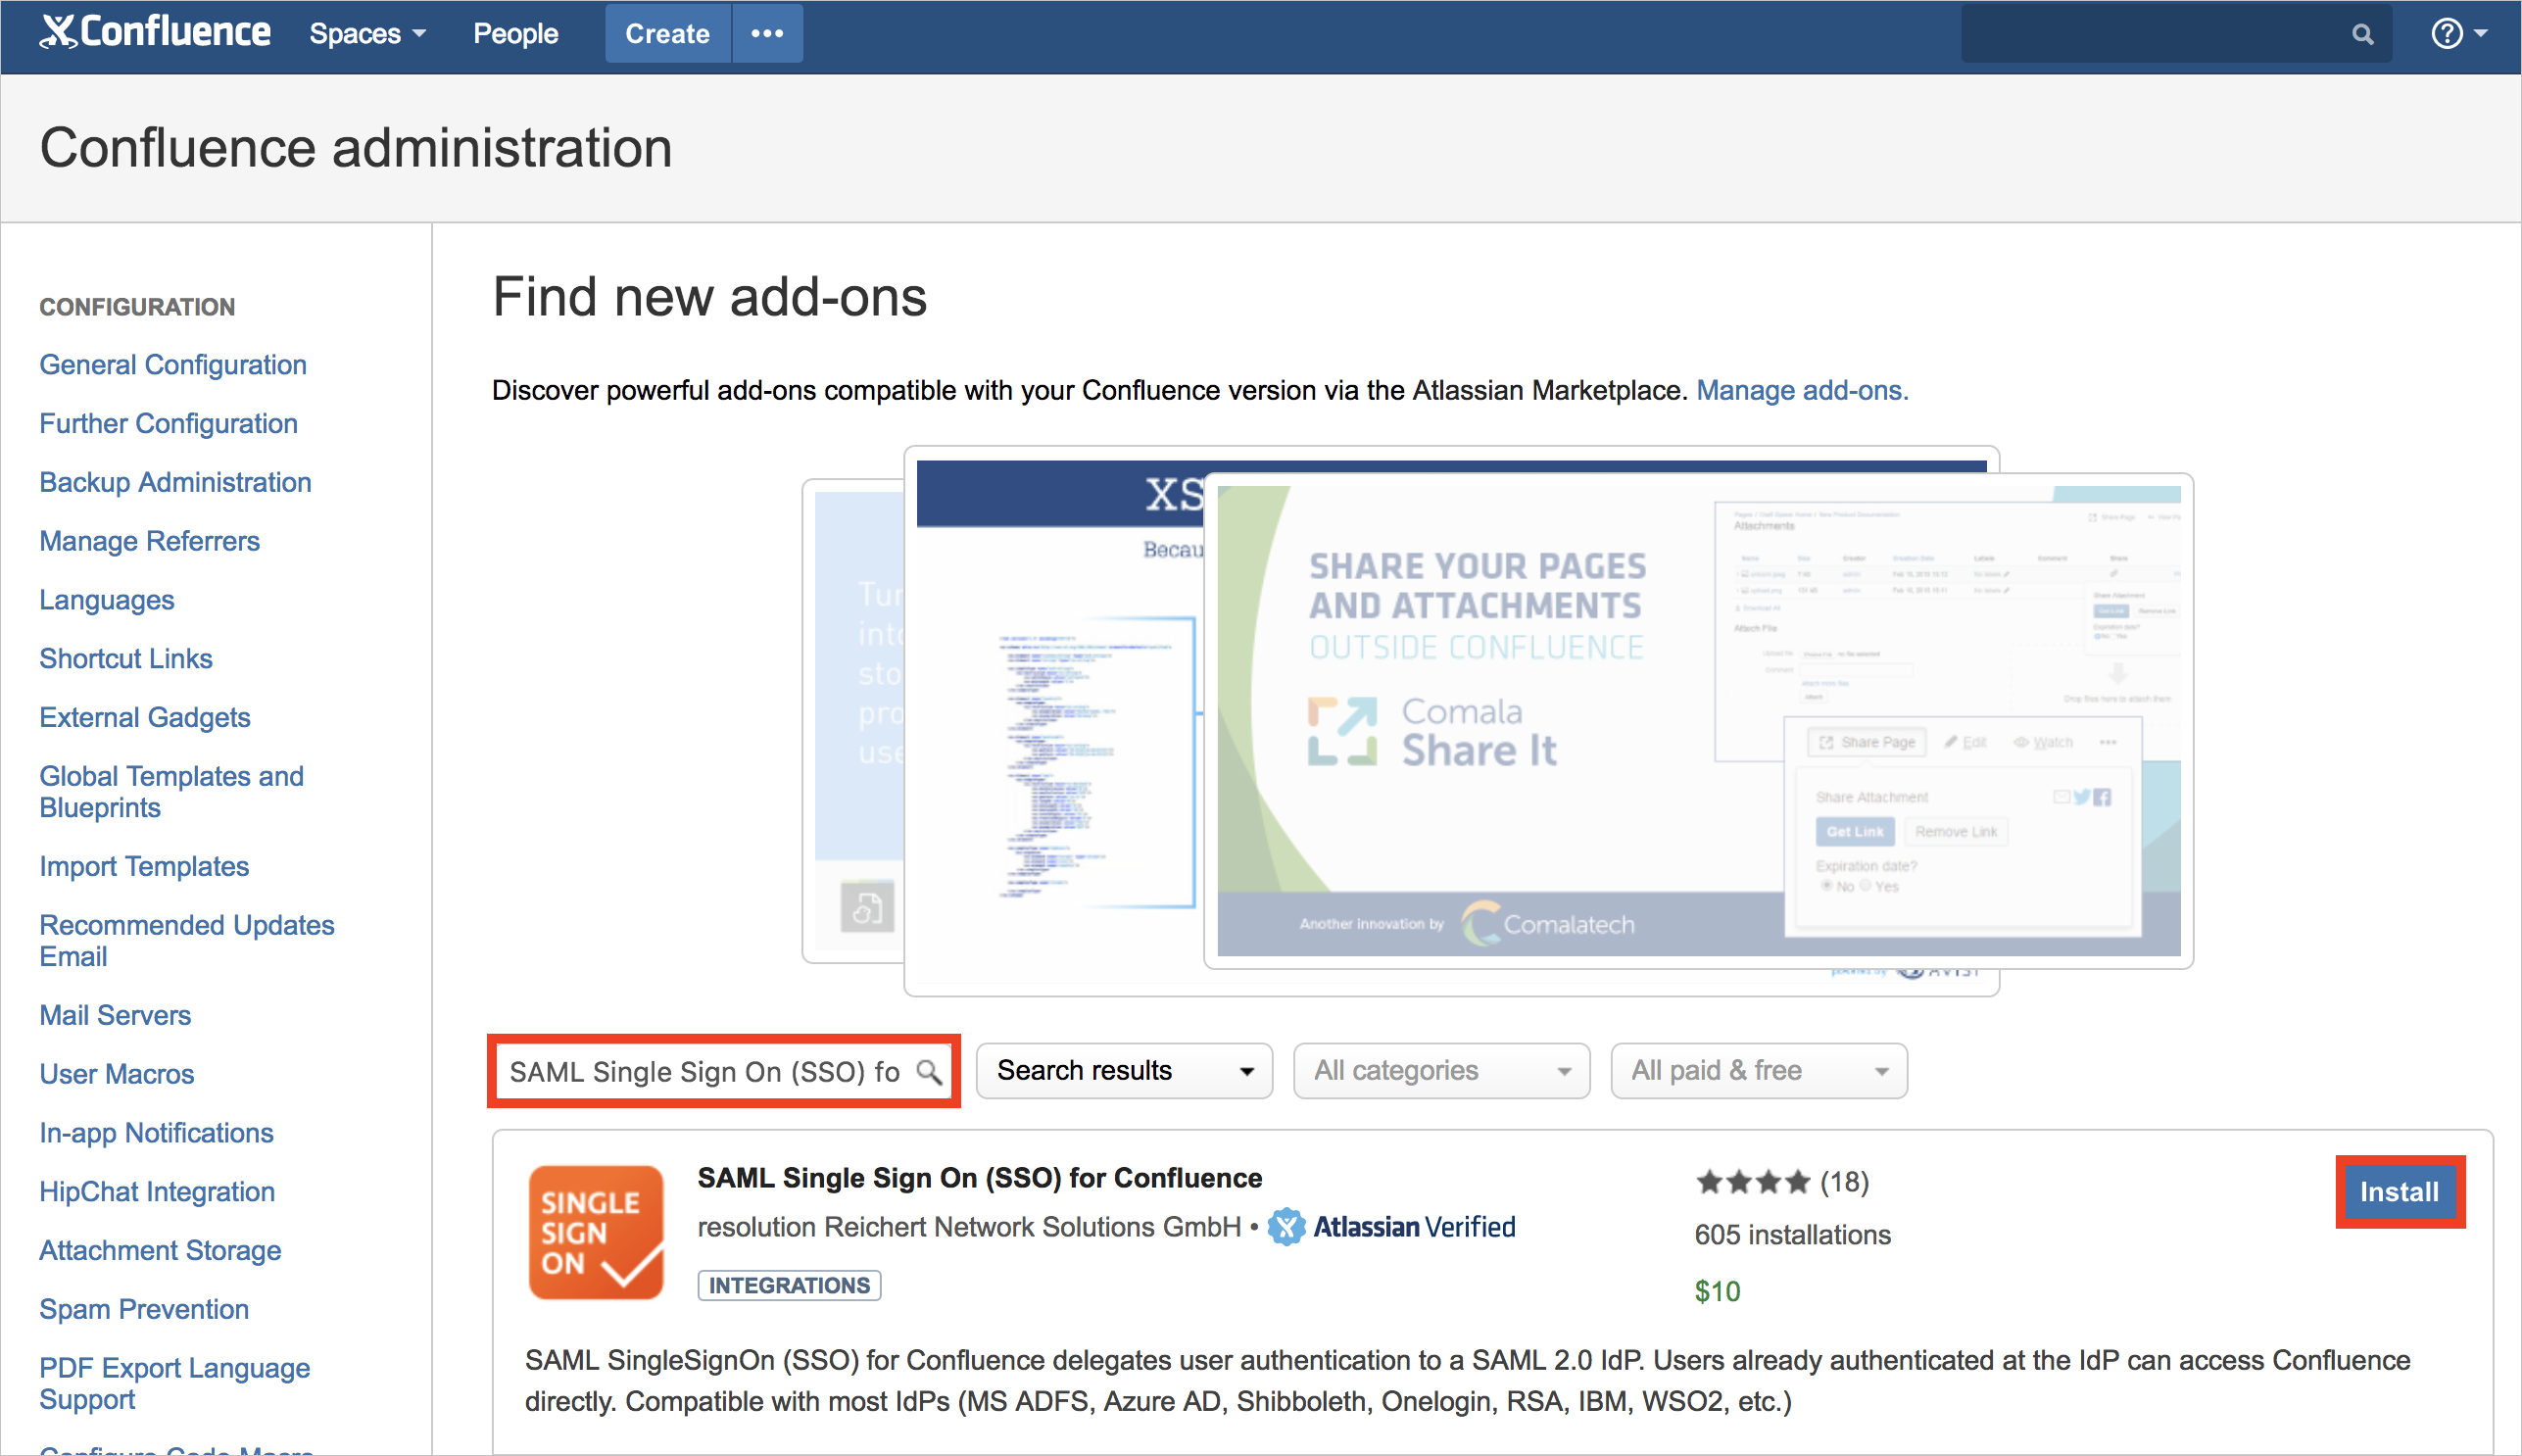 Screenshot that shows the "Find new add-ons" page with "S A M L Single Sign On (S S O) for Confluence" in the search box and the "Install" button selected.